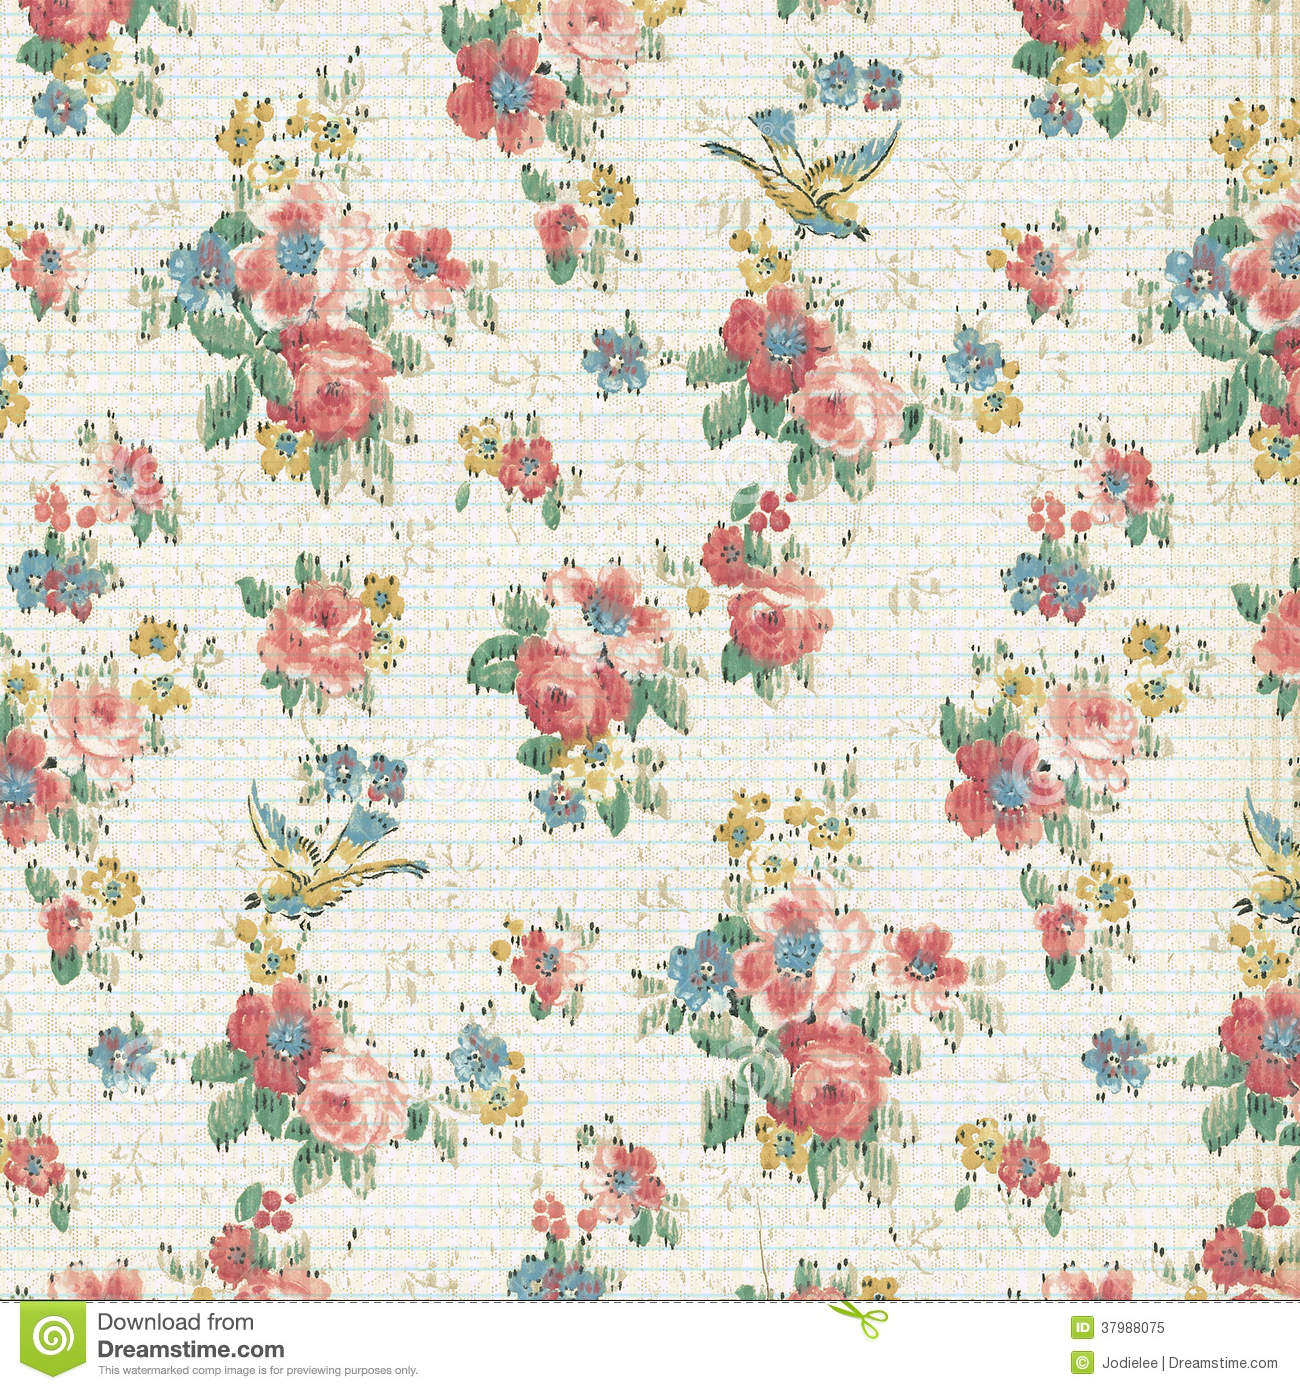 Shabby Chic Vintage Floral Wallpaper